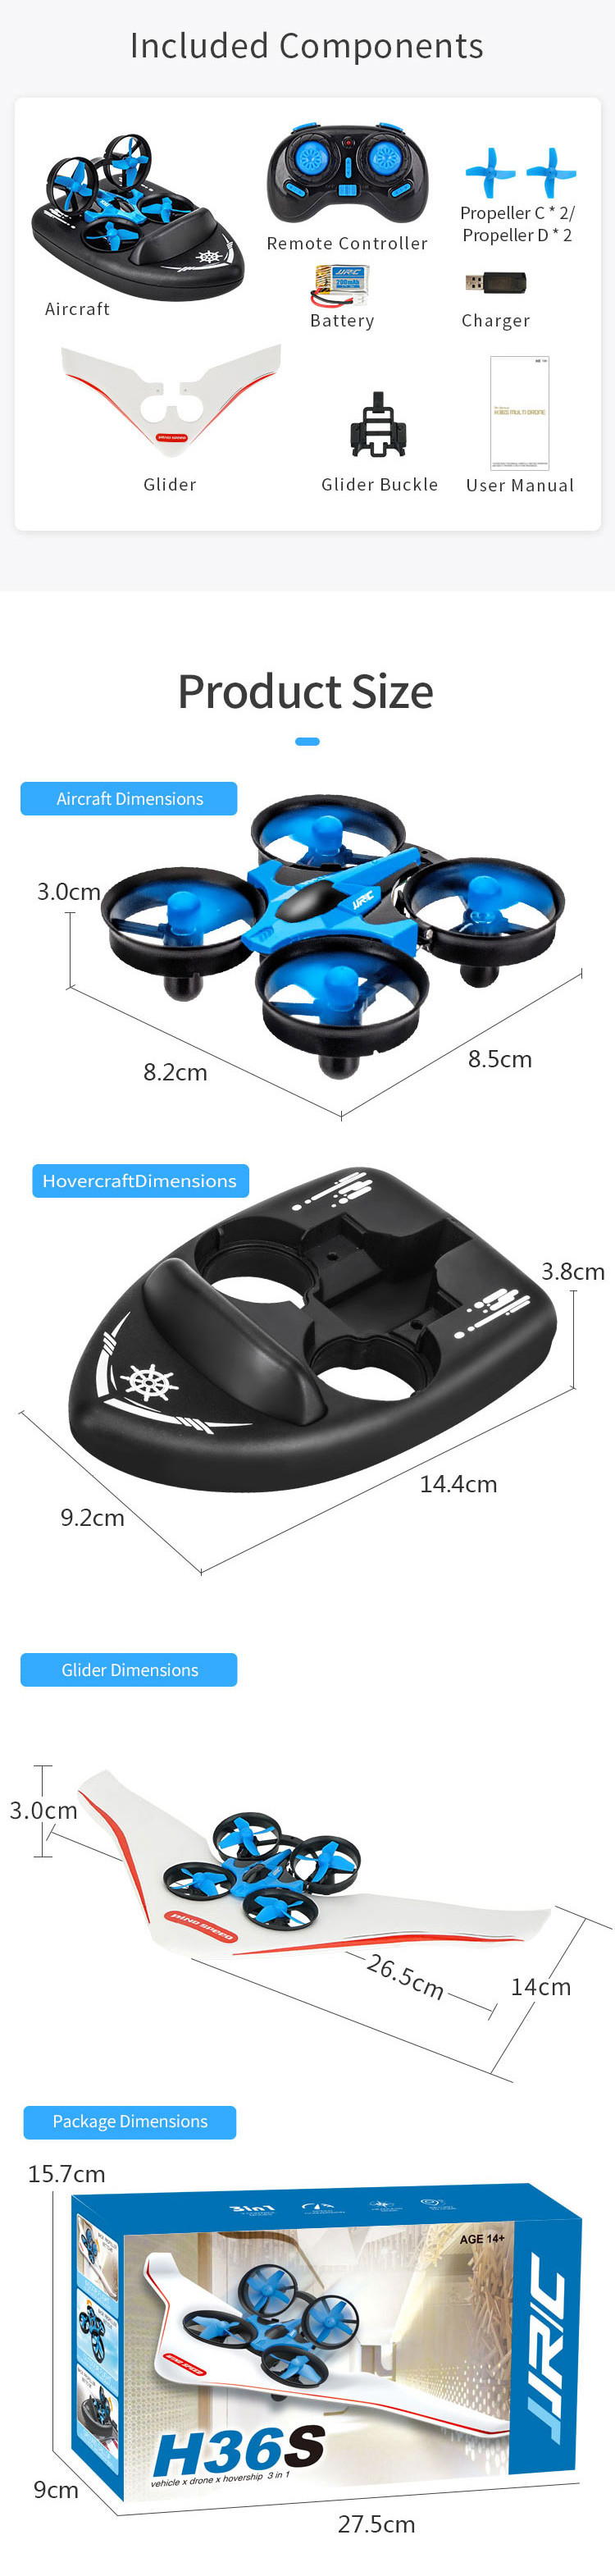 JJRC H36S 2.4G 4 In1 Flying Drone Land Driving Boat Glidering Detachable Quadcopter RTF 5